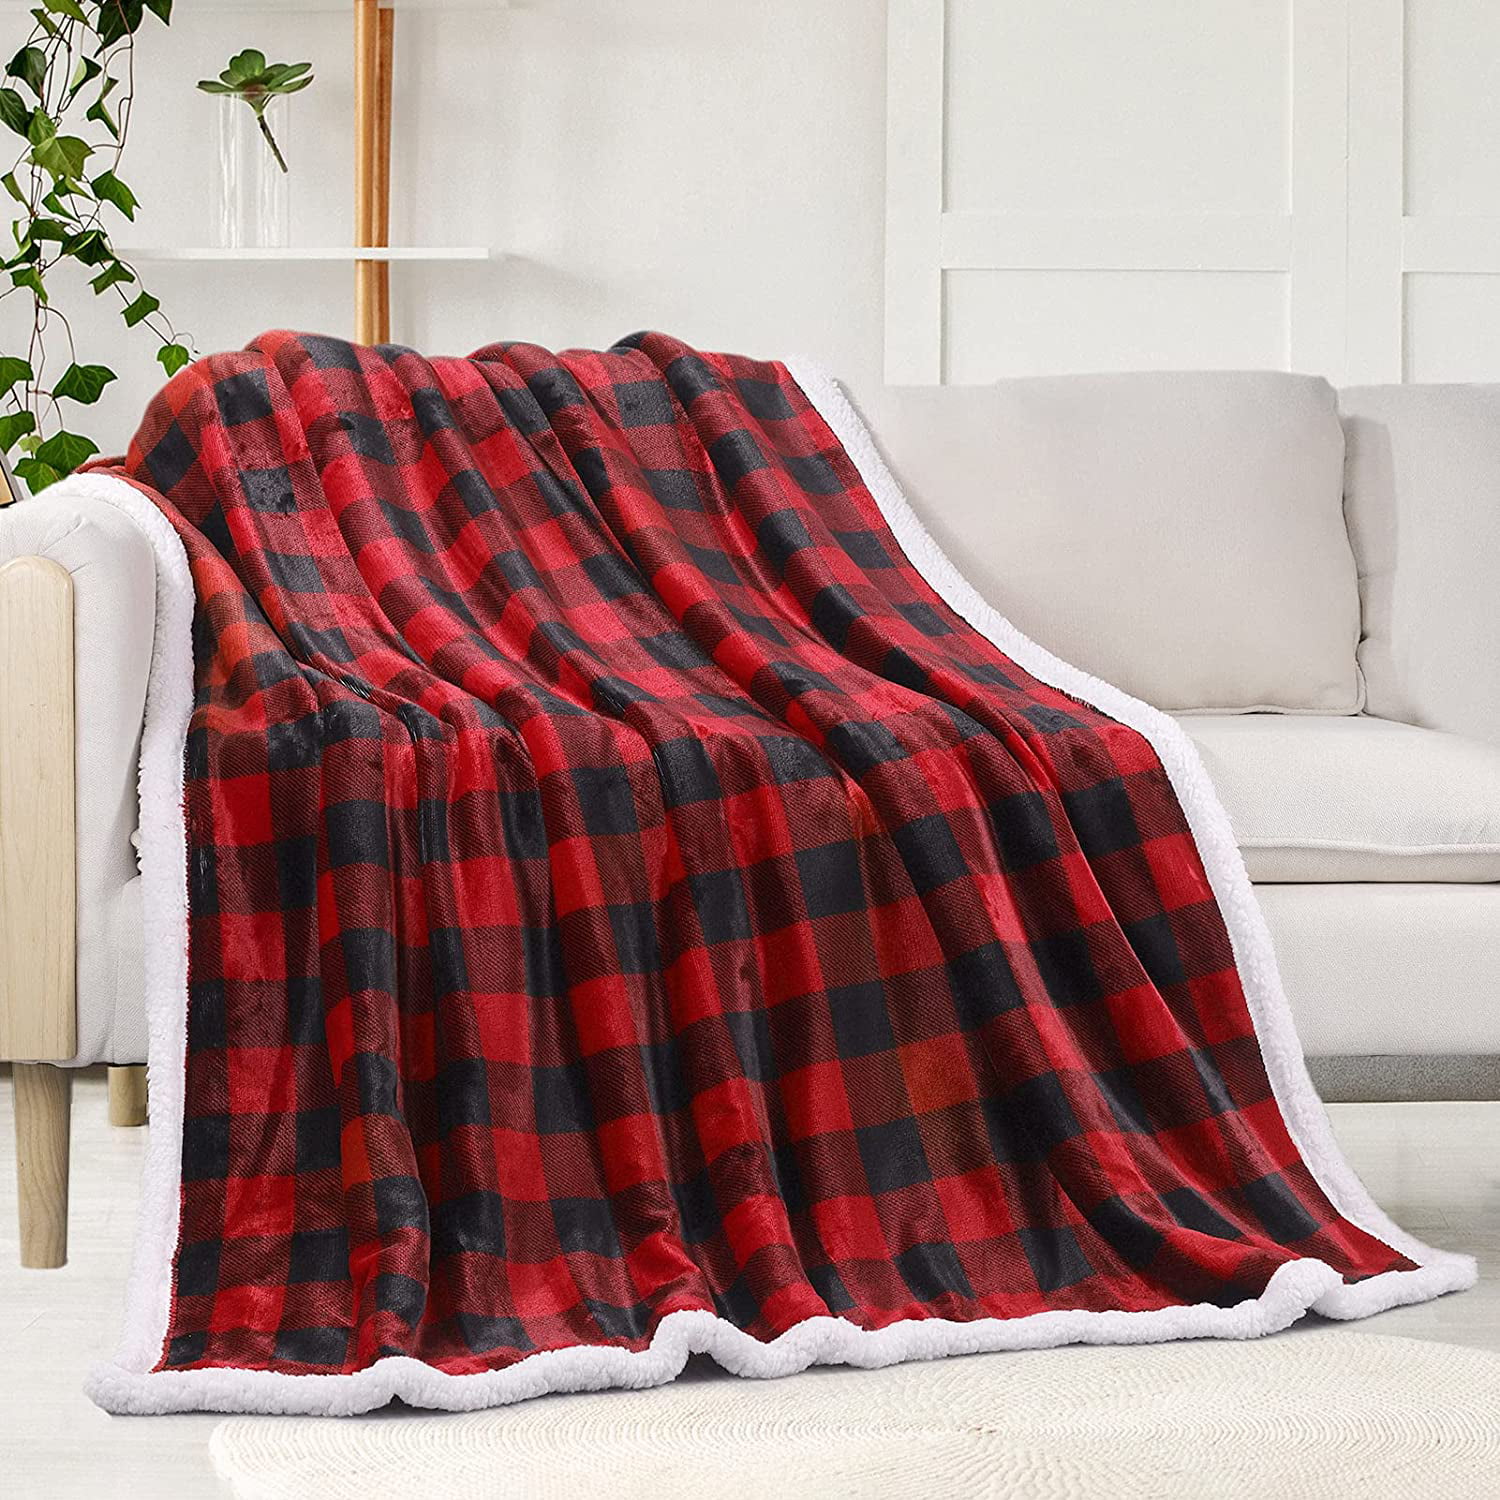 Flannel Bed Blankets Lightweight Plush & Warm Decorative Gingham Red Sofa Travel Camping Blankets for All Seasons 50x60inch Buffalo Check Plaid Soft Fleece Throw Blanket for Couch